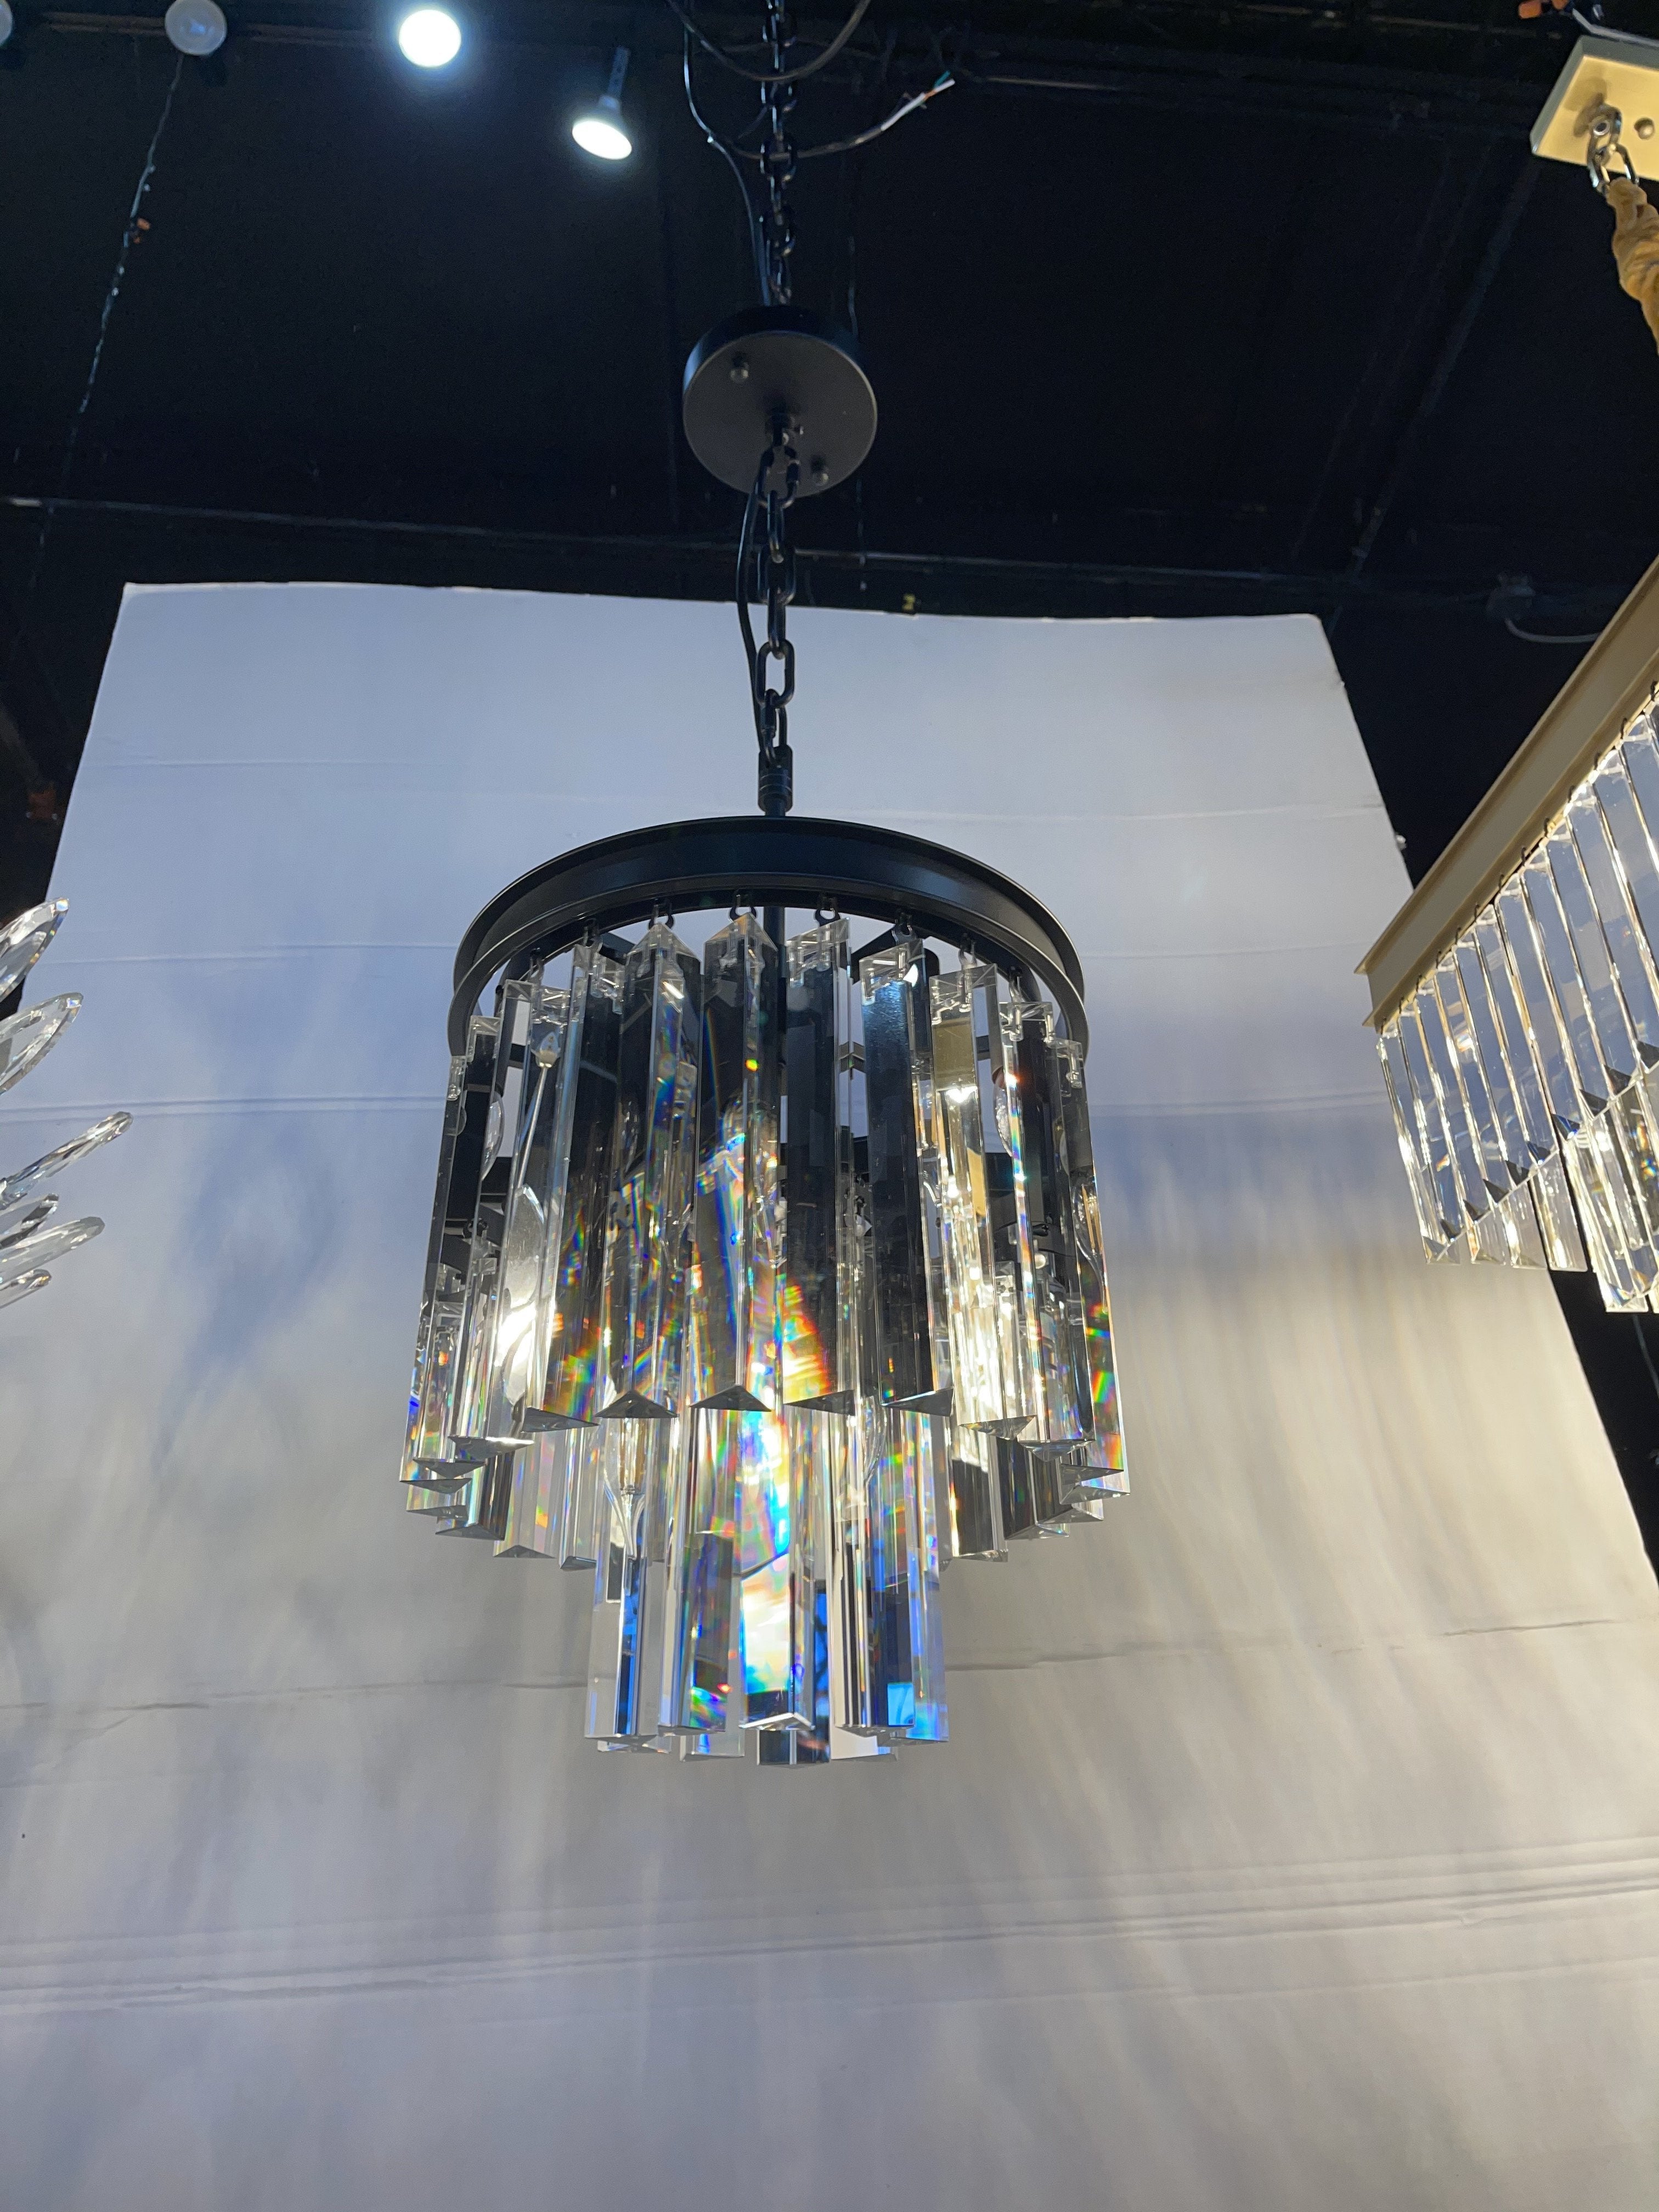 Odeon Round Crystal Fringe Chandelier Collection - Italian Concept